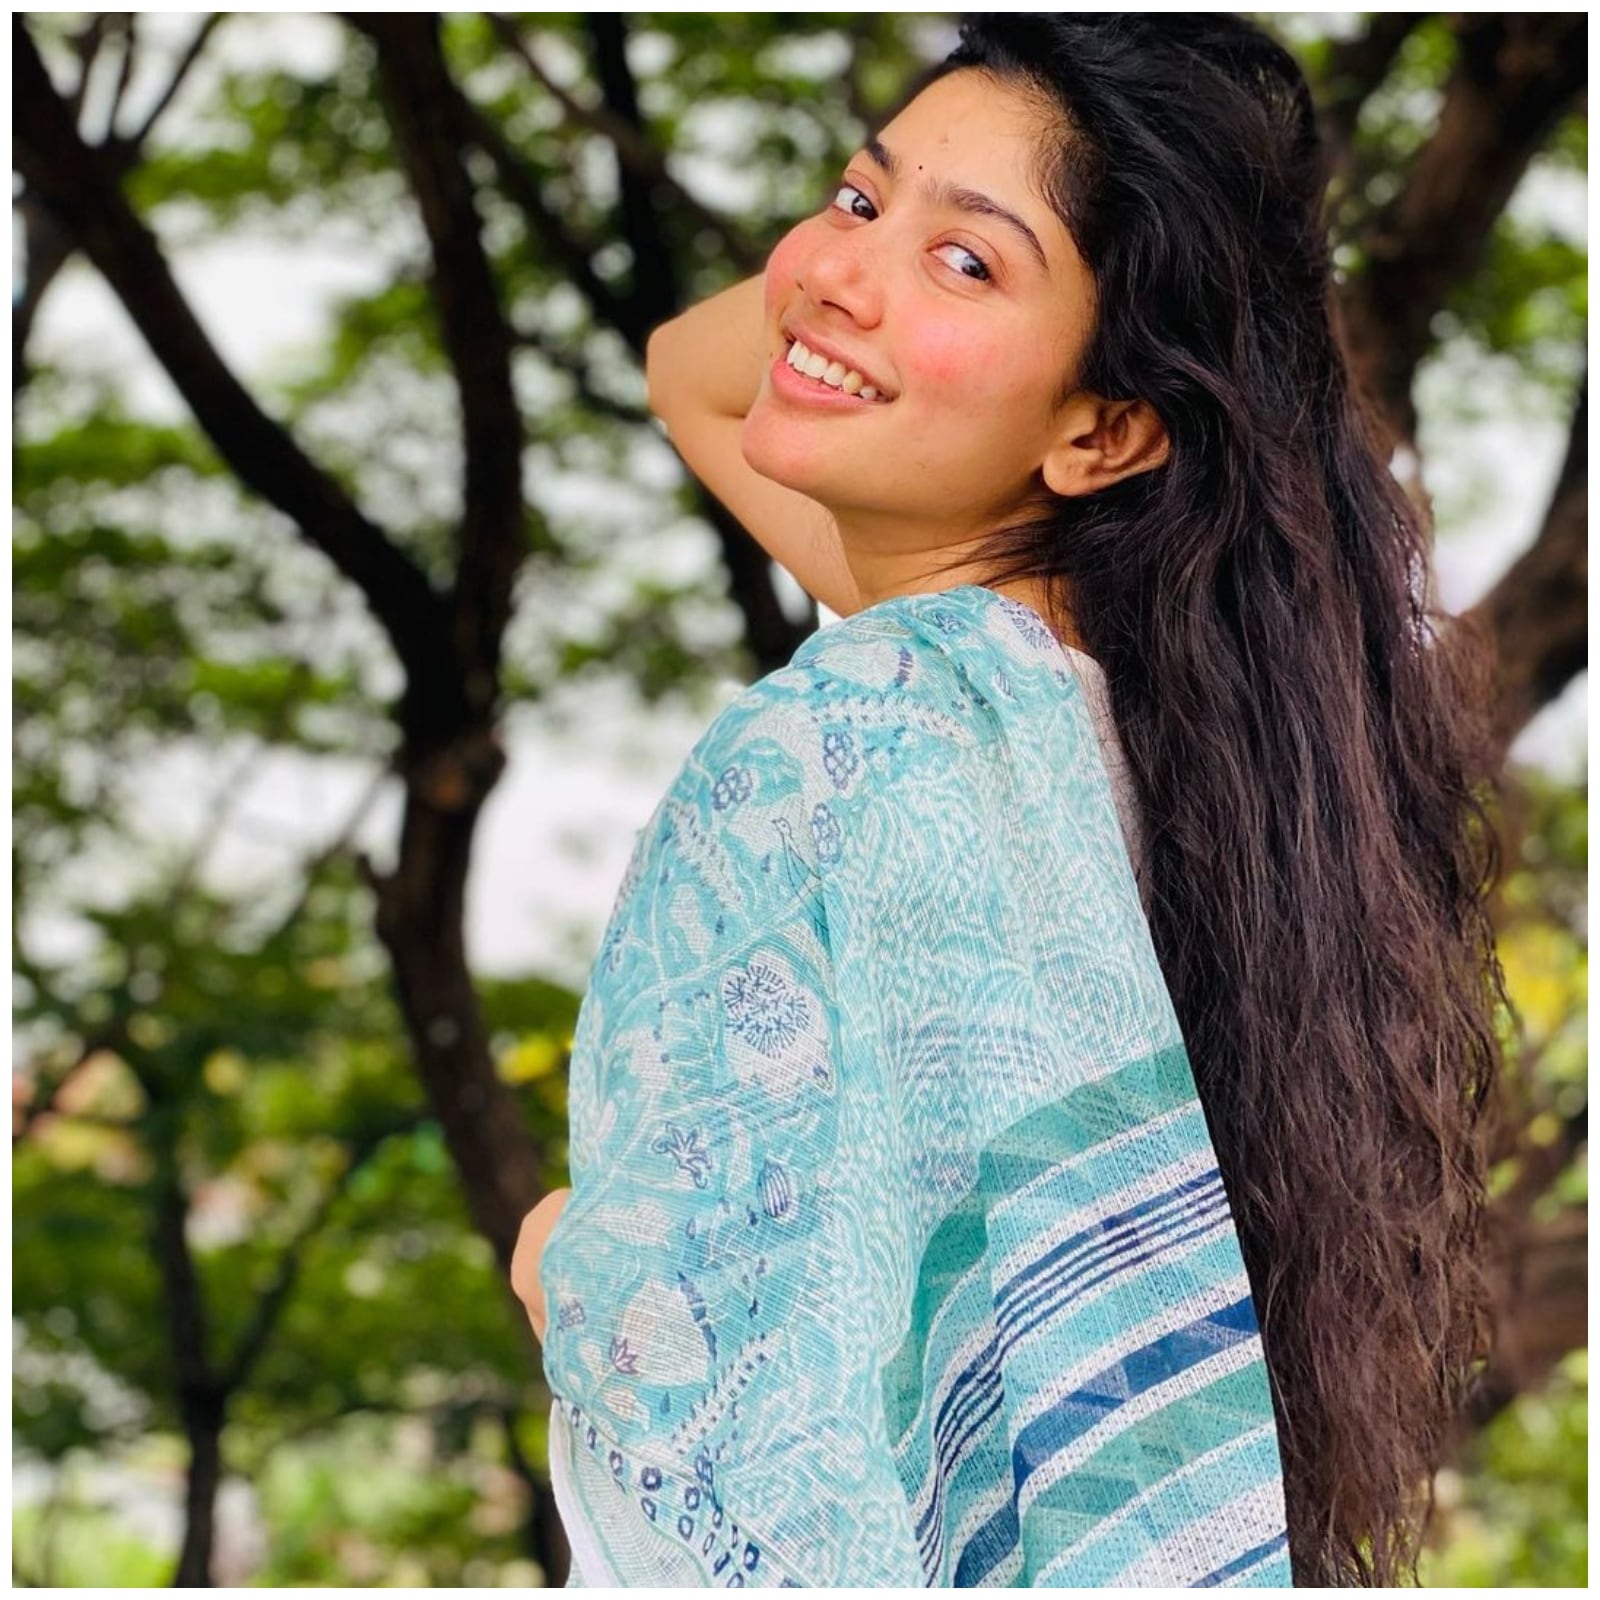 Sai Pallavi New X Videos - From Assets to Fee Per Film, All You Want to Know About Sai Pallavi